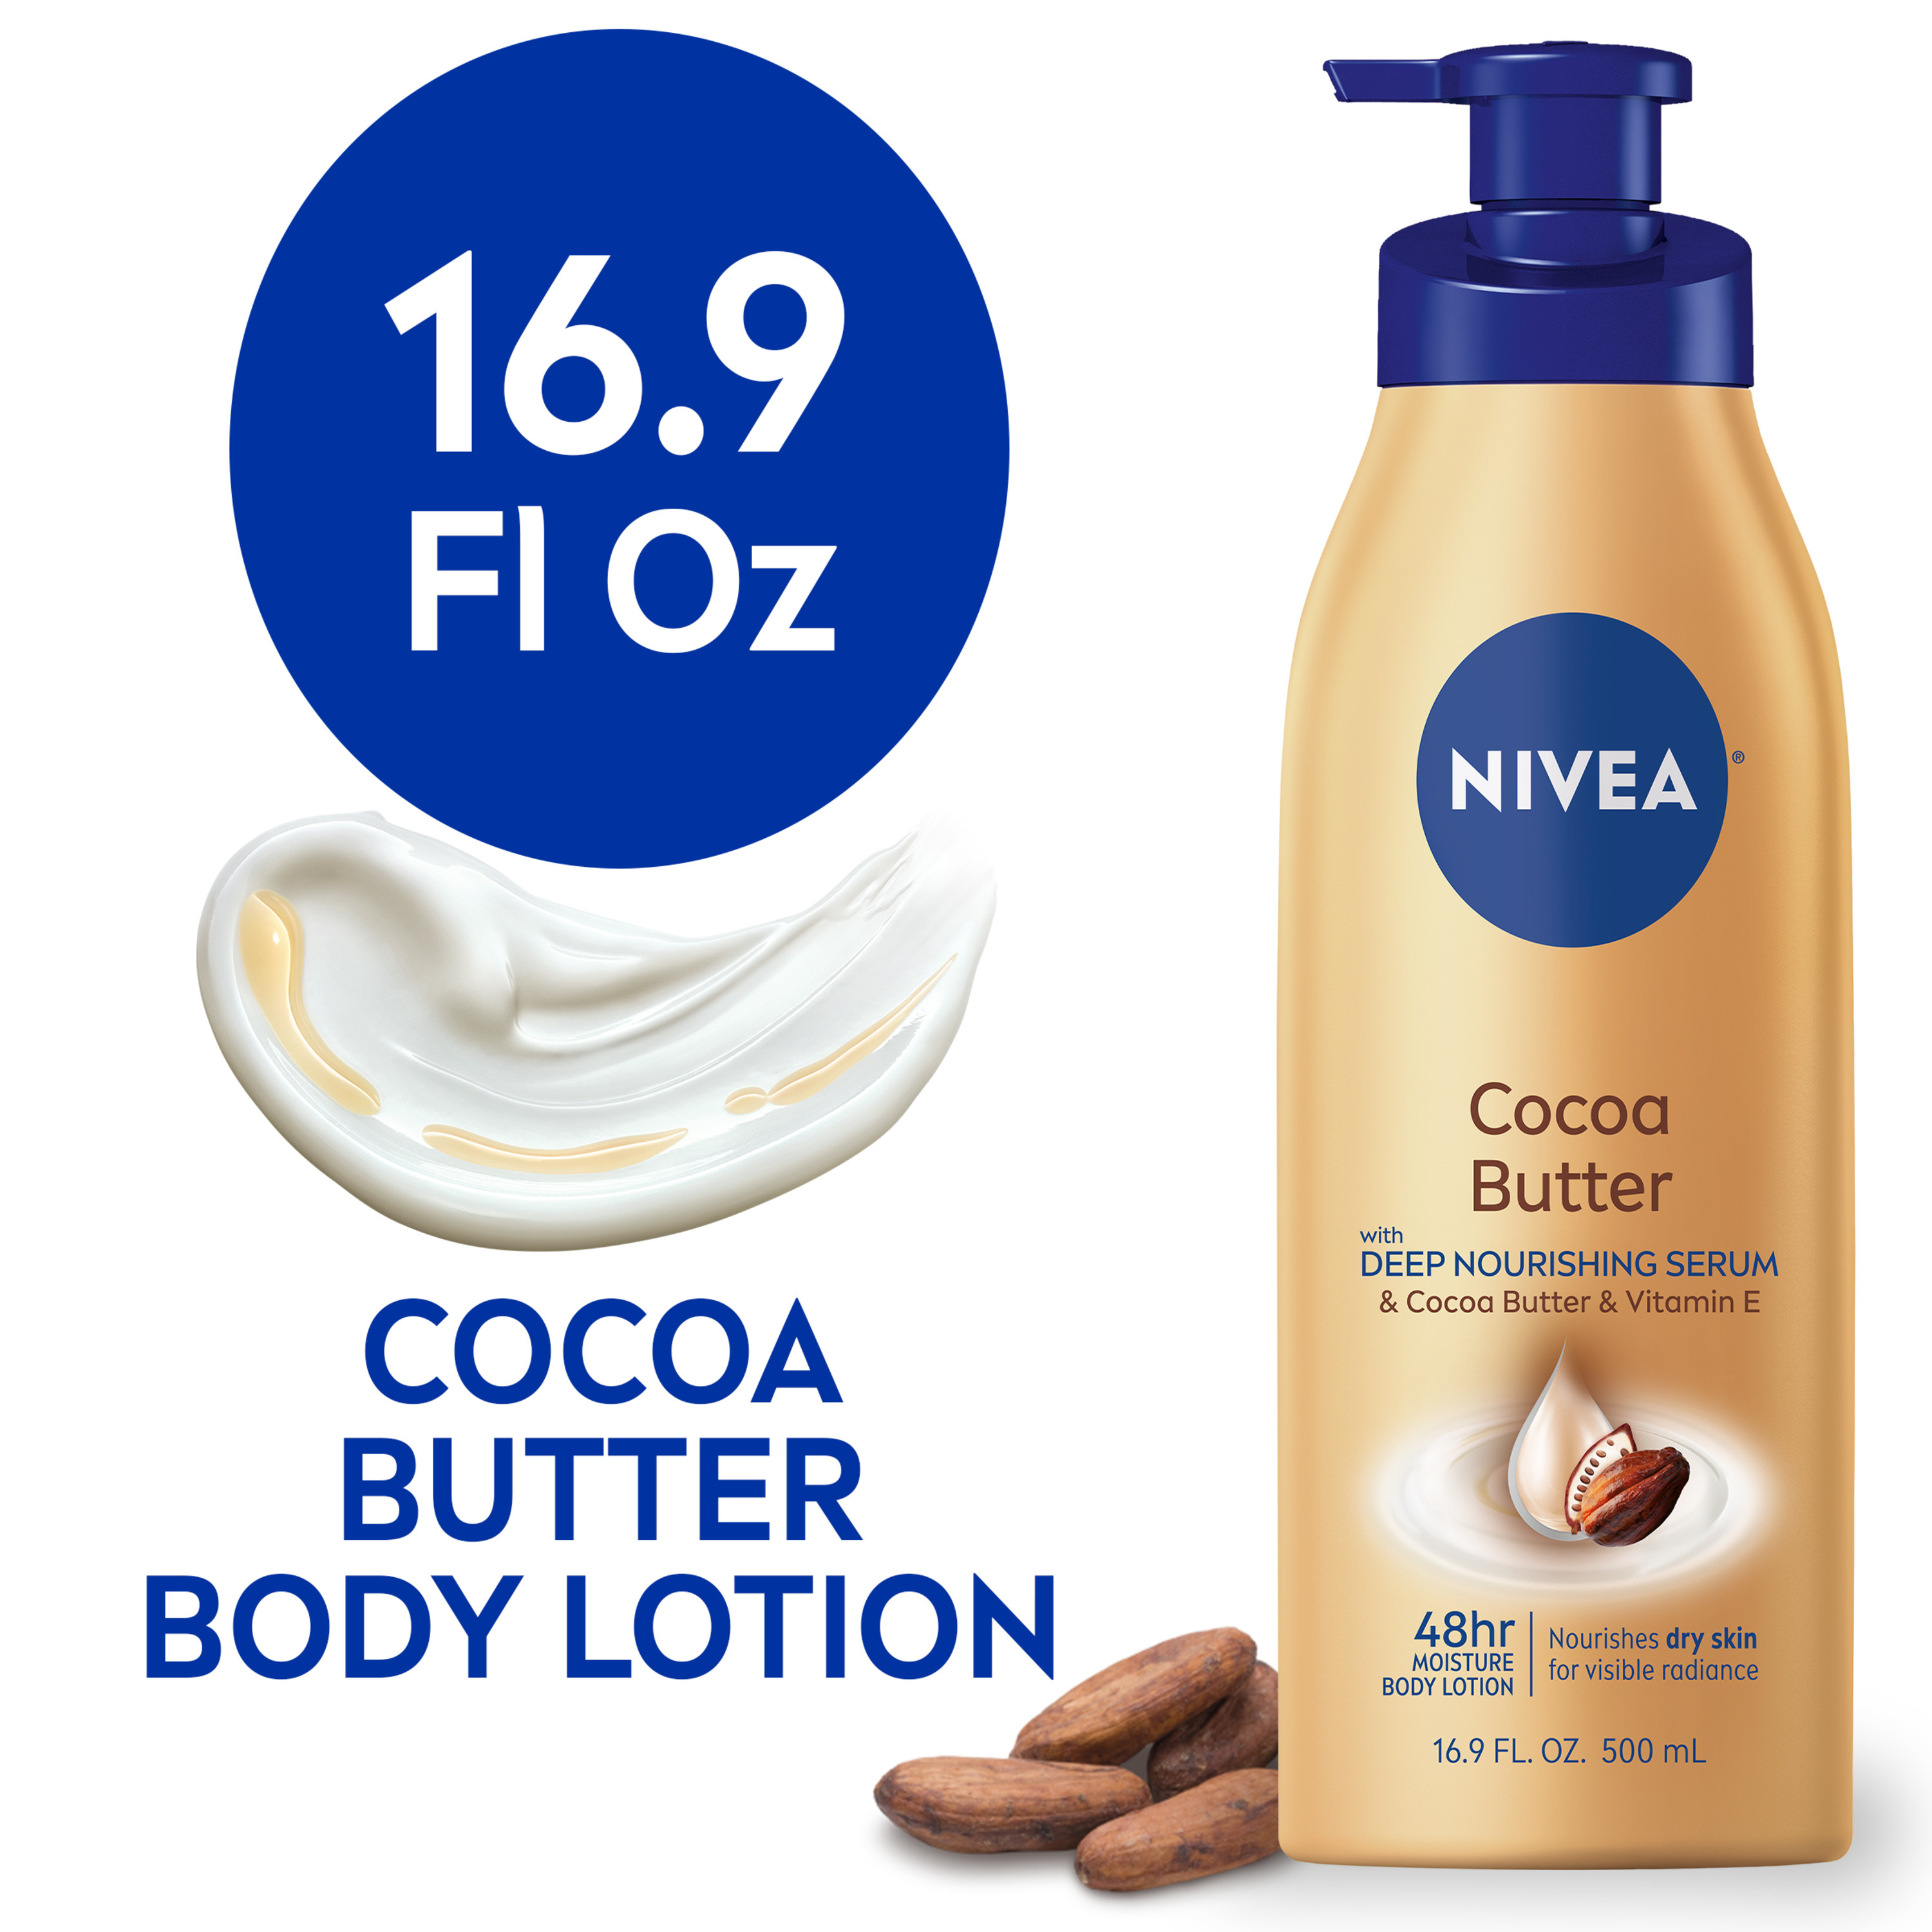 NIVEA Cocoa Butter Body Lotion with Deep Nourishing Serum, 16.9 Fl Oz - image 1 of 10